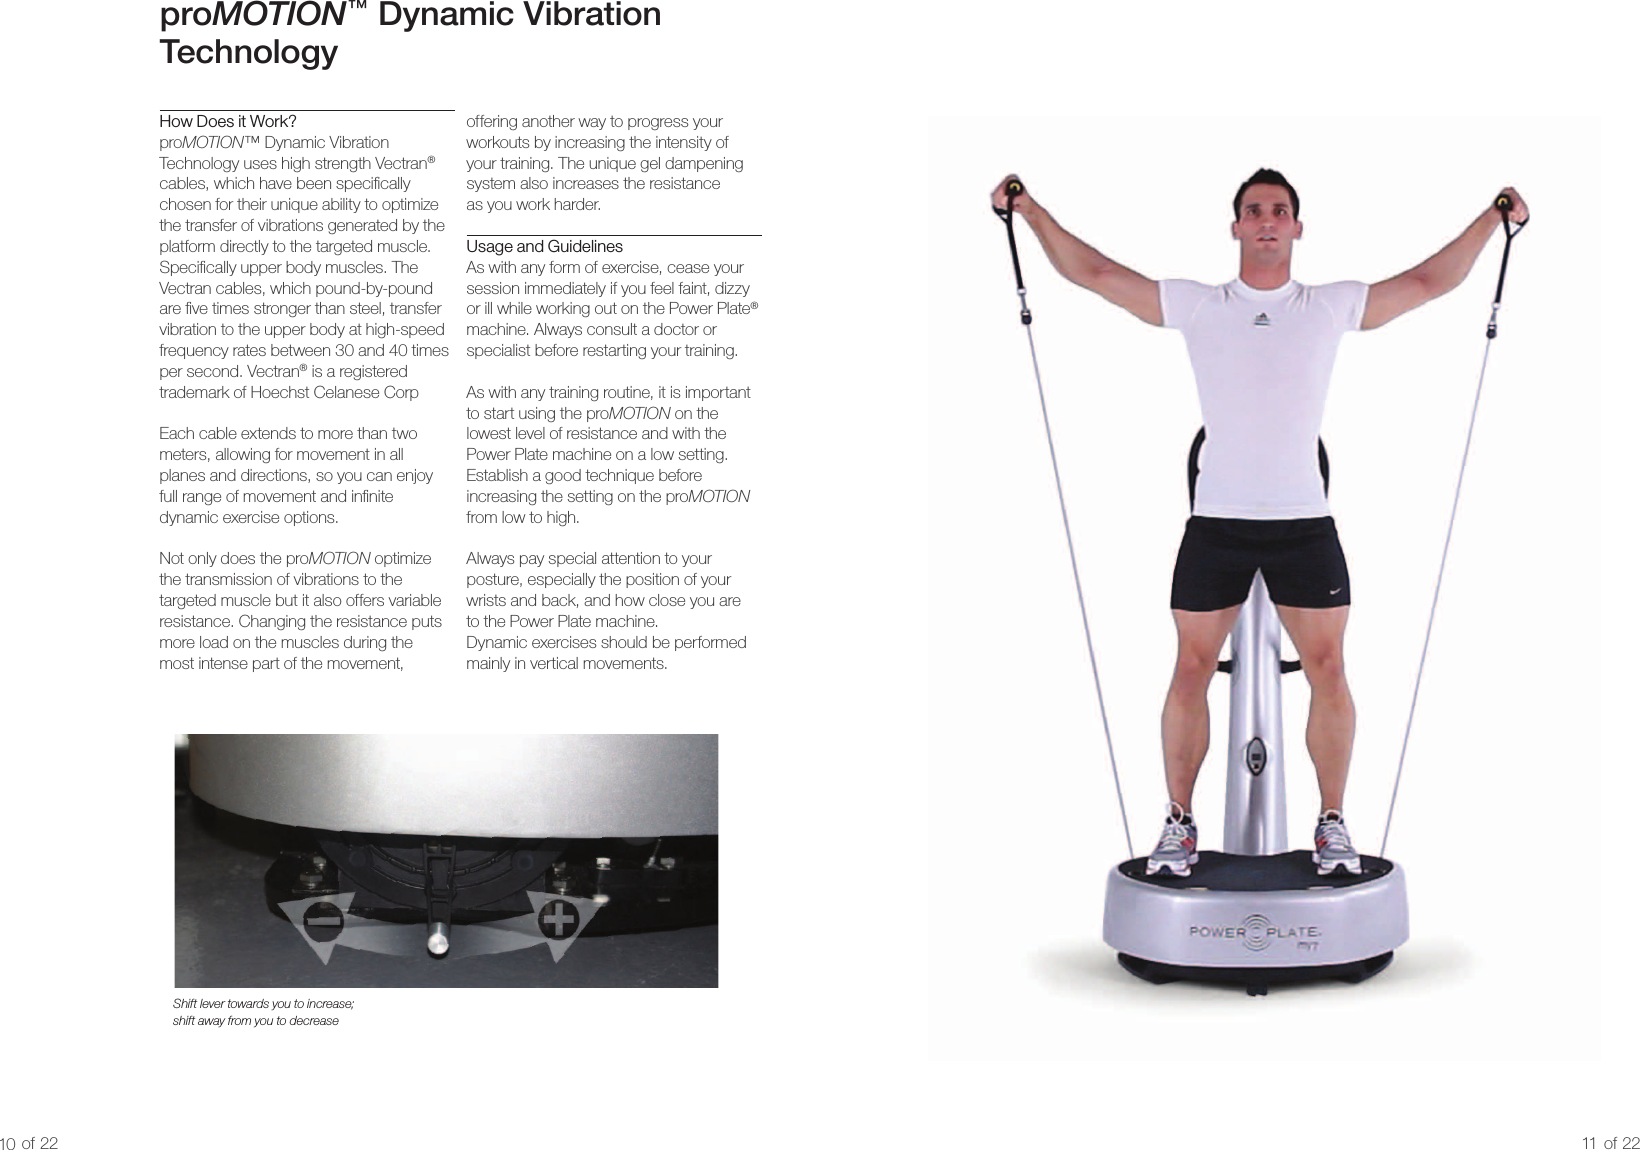 proMOTION™  Dynamic Vibration TechnologyHow Does it Work?proMOTION™ Dynamic Vibration Technology uses high strength Vectran® cables, which have been specically chosen for their unique ability to optimize the transfer of vibrations generated by the platform directly to the targeted muscle. Specically upper body muscles. The Vectran cables, which pound-by-pound are ve times stronger than steel, transfer vibration to the upper body at high-speed frequency rates between 30 and 40 times per second. Vectran® is a registered trademark of Hoechst Celanese CorpEach cable extends to more than two meters, allowing for movement in all  planes and directions, so you can enjoy full range of movement and innite dynamic exercise options.Not only does the proMOTION optimize the transmission of vibrations to the targeted muscle but it also offers variable resistance. Changing the resistance puts more load on the muscles during the  most intense part of the movement, Shift lever towards you to increase; shift away from you to decreaseoffering another way to progress your workouts by increasing the intensity of your training. The unique gel dampening system also increases the resistance  as you work harder.Usage and GuidelinesAs with any form of exercise, cease your session immediately if you feel faint, dizzy or ill while working out on the Power Plate® machine. Always consult a doctor or specialist before restarting your training.As with any training routine, it is important  to start using the proMOTION on the lowest level of resistance and with the  Power Plate machine on a low setting. Establish a good technique before increasing the setting on the proMOTION from low to high.Always pay special attention to your  posture, especially the position of your  wrists and back, and how close you are  to the Power Plate machine.  Dynamic exercises should be performed mainly in vertical movements.10 of 22 11 of 22